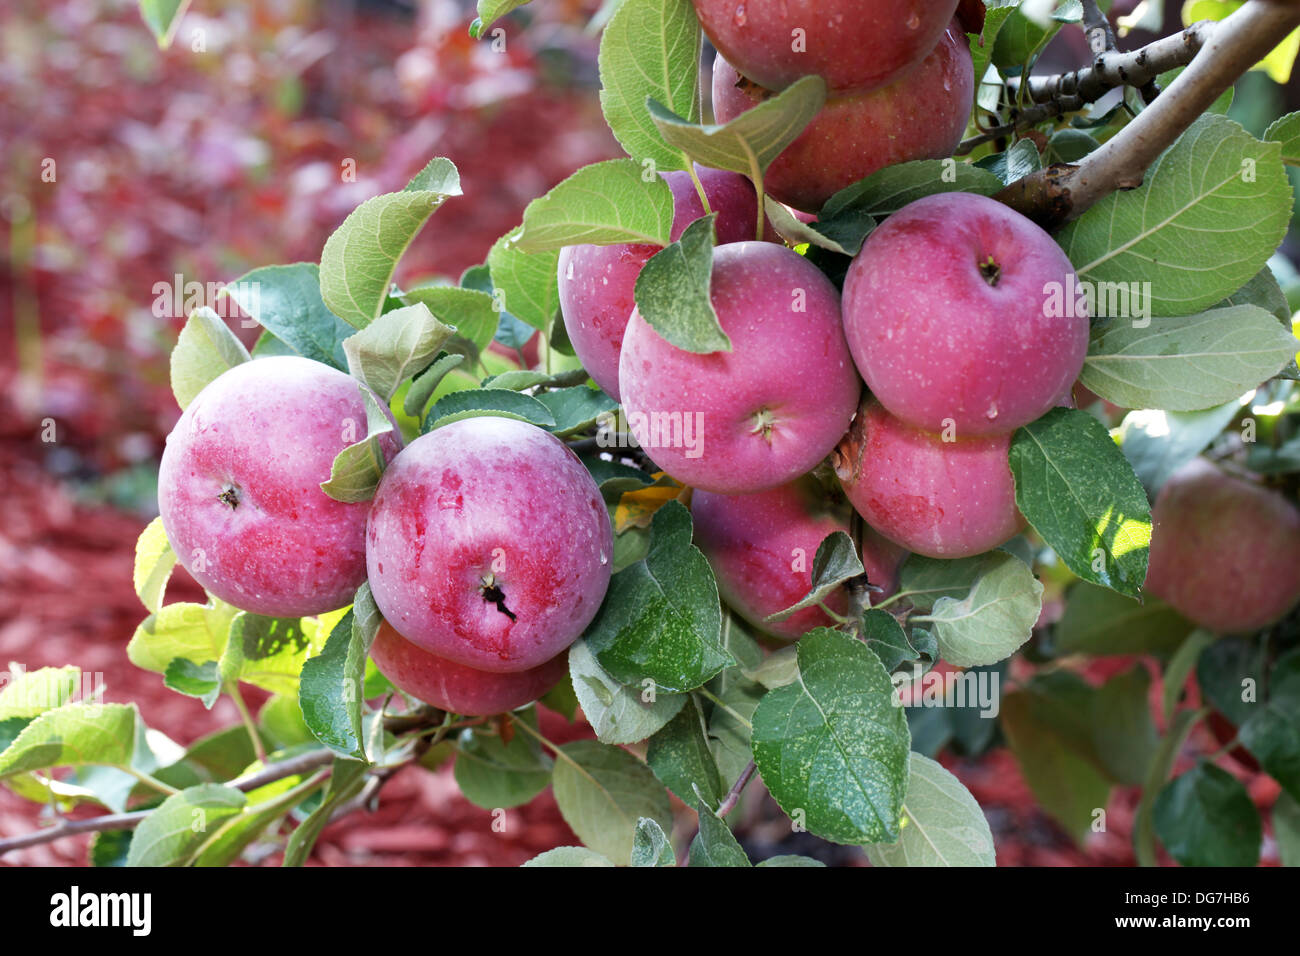 Beautiful red-ripe apples on the branch. Close-up shot. Stock Photo